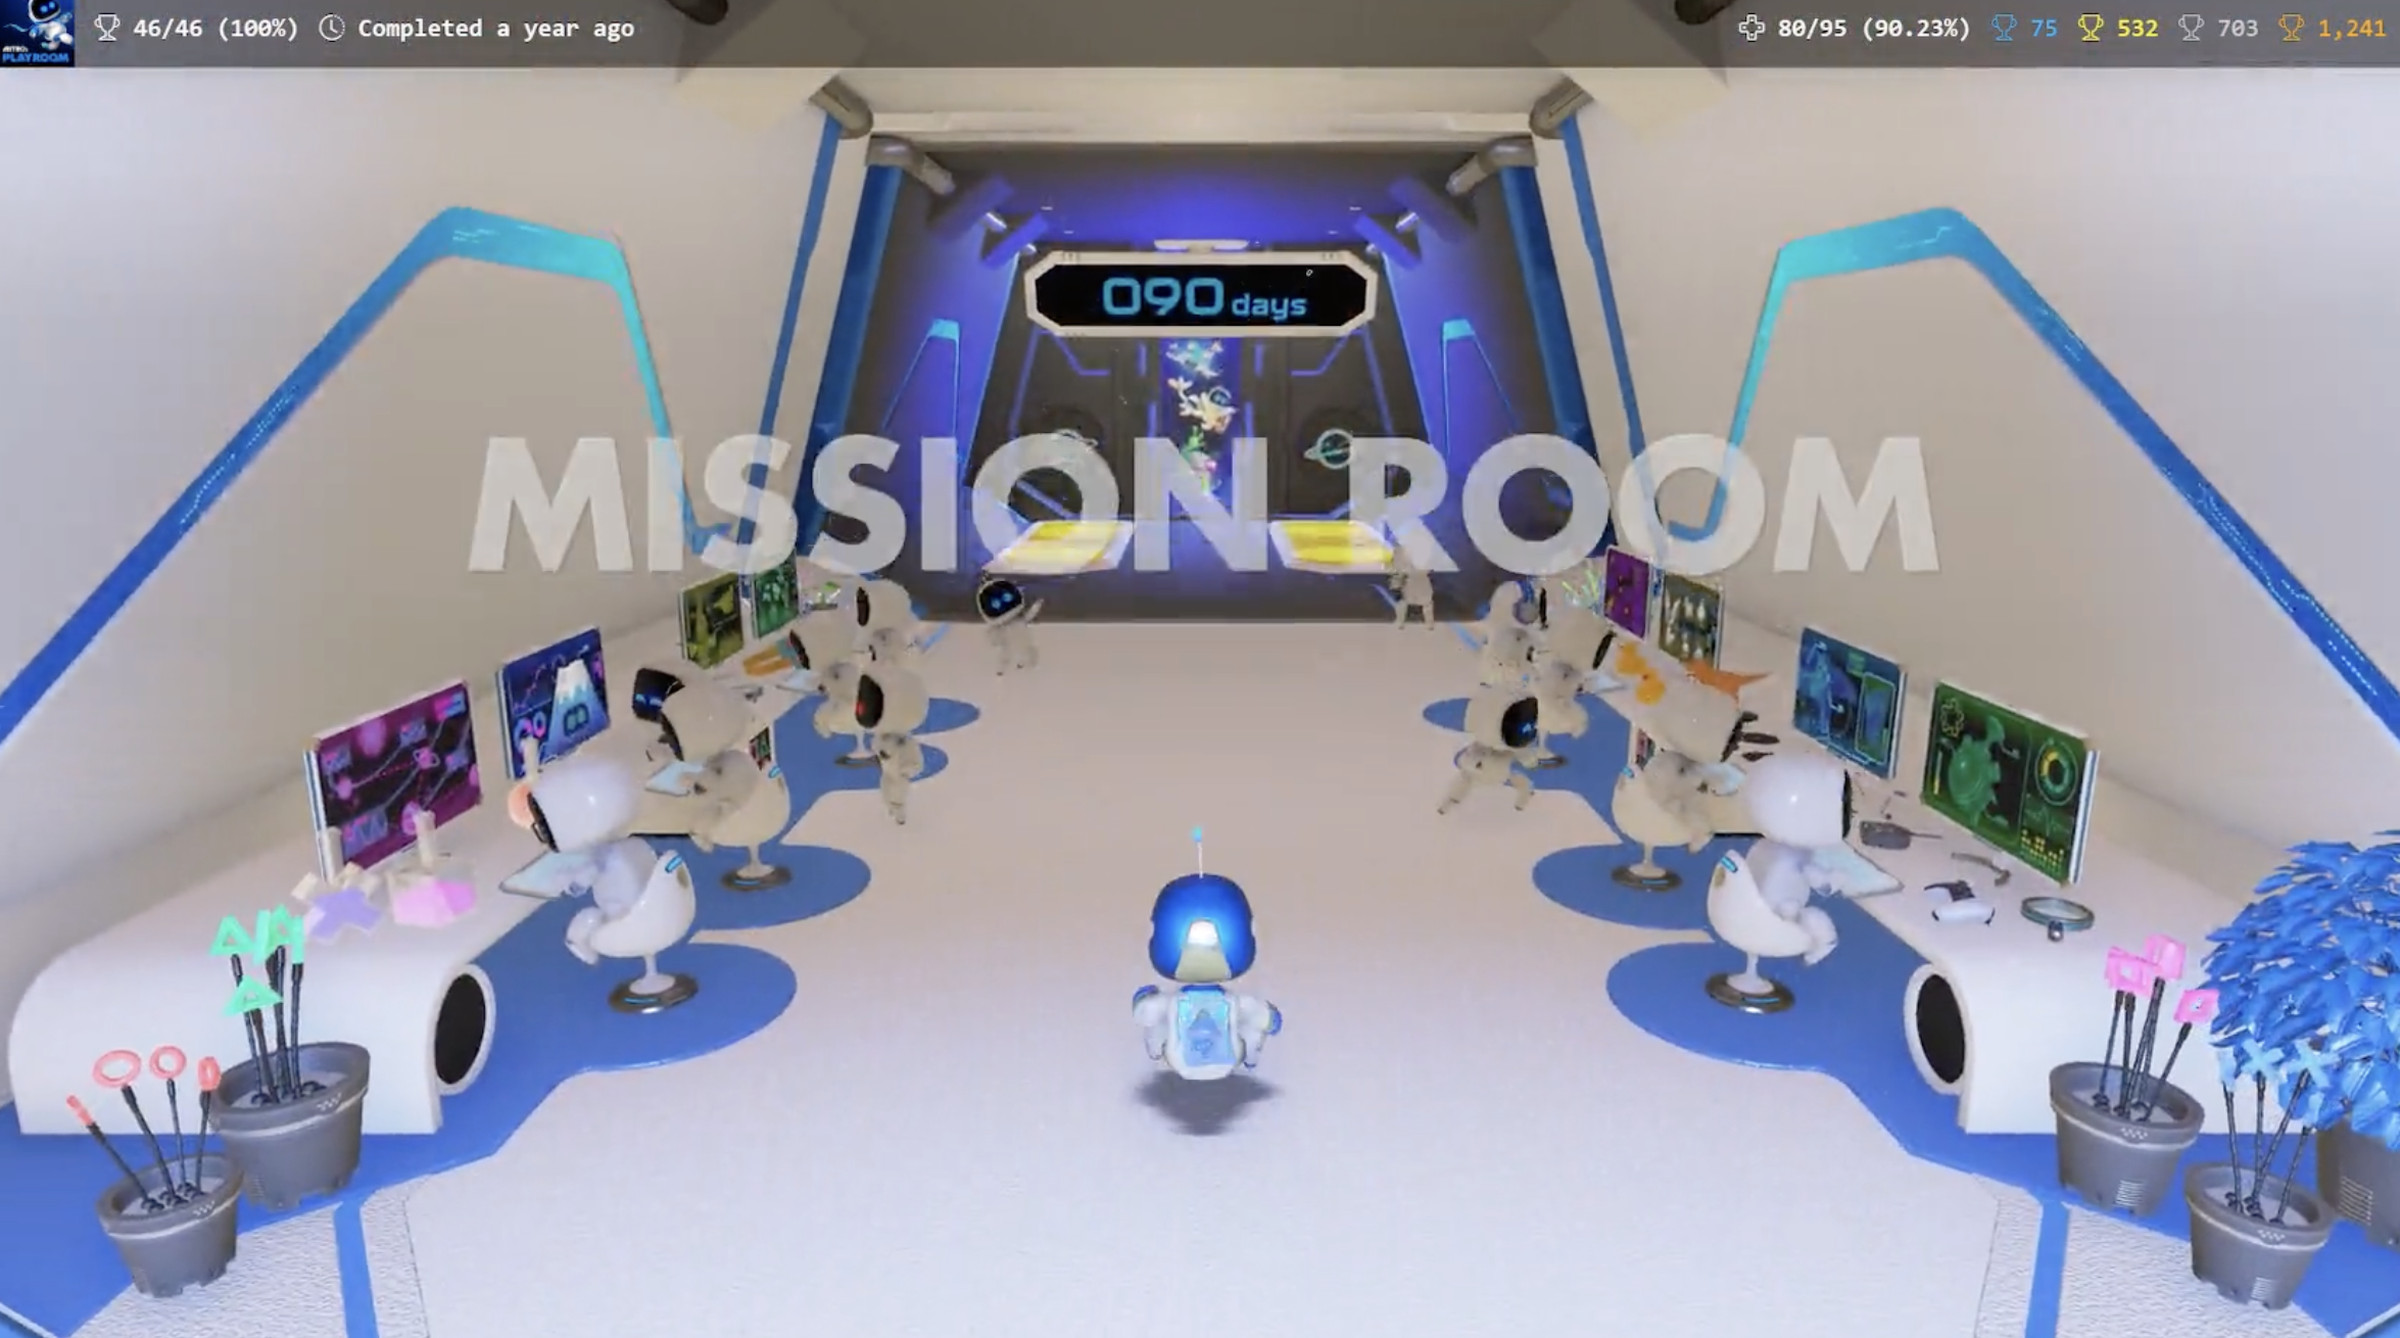 <em>A new mission room appears in the PS Labo room once you go through a portal.</em>